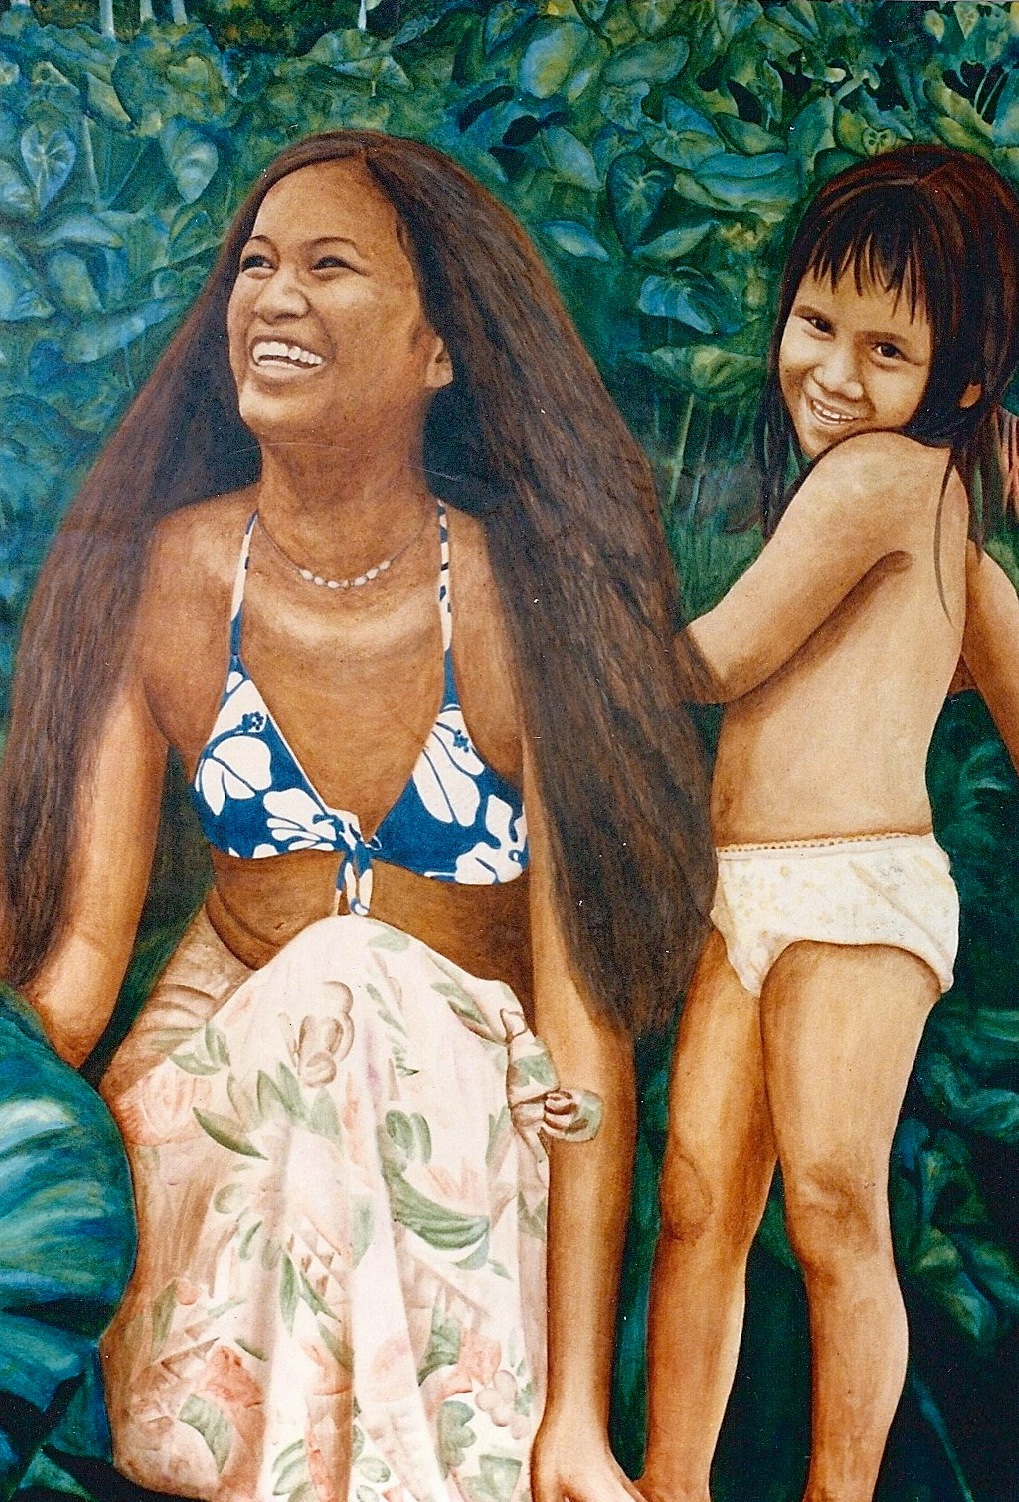 Calley’s dear friend and neighbor, Louise Kaiulani Sausen and her daughter Lehua posed for the auana (modern) side of the mural.  It was Kaiulani that introduced Calley to her kumu, Braddah Frank Hewett.  